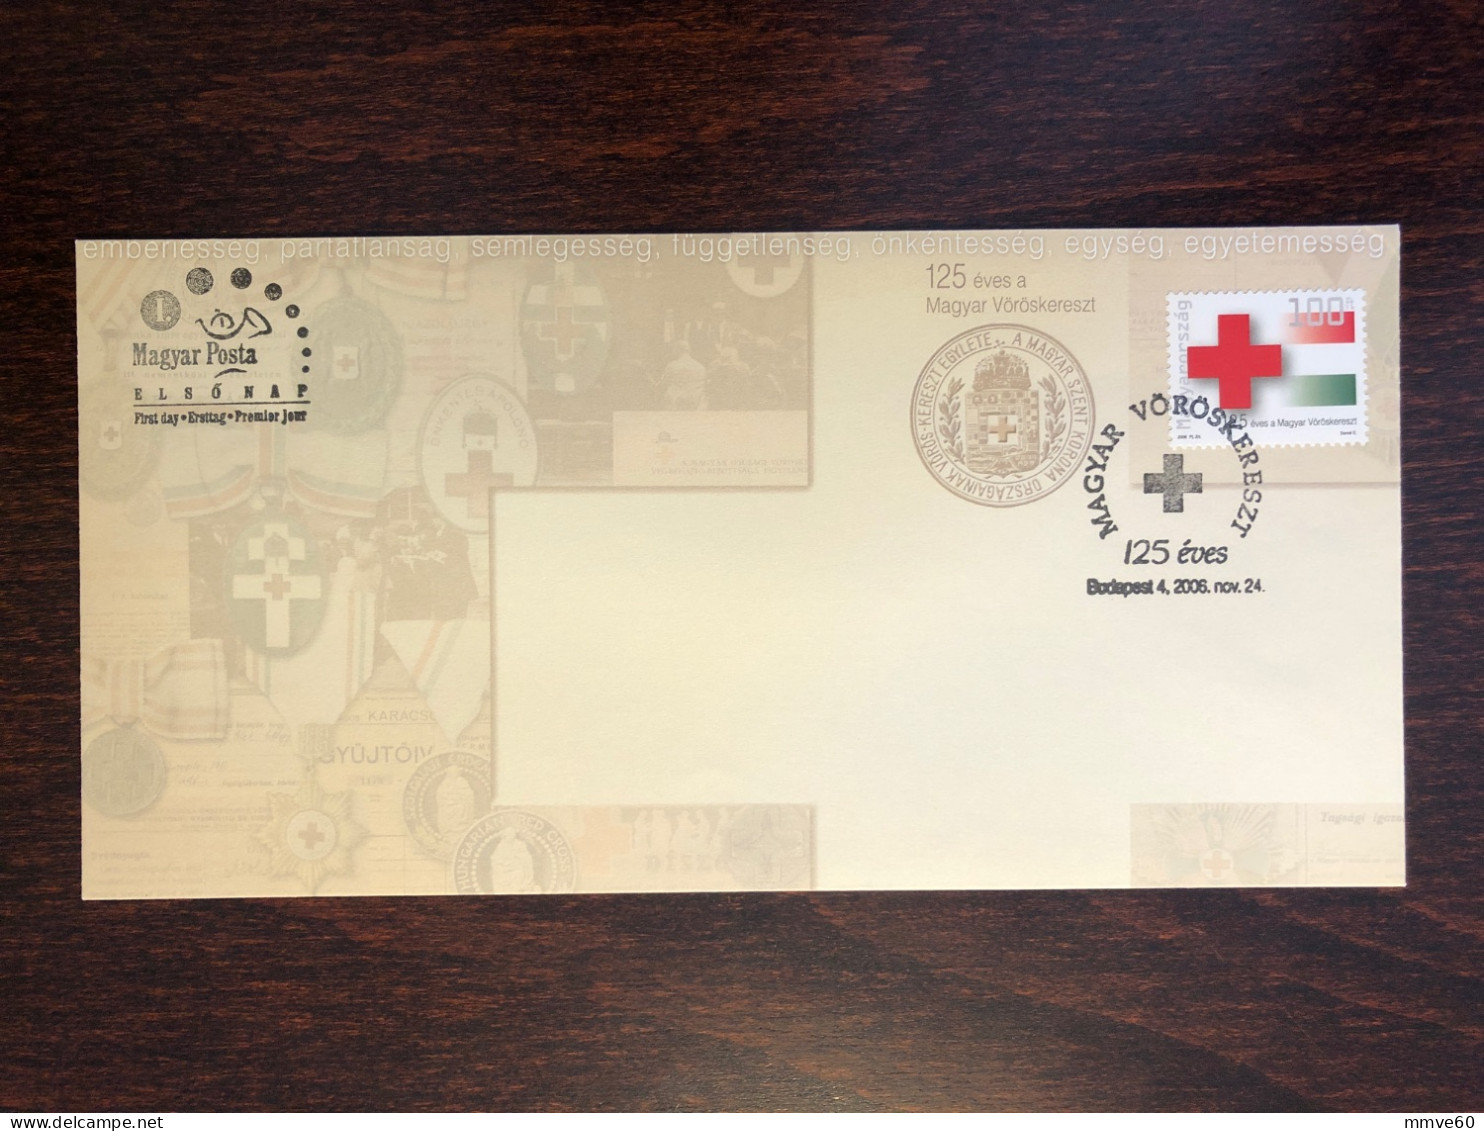 HUNGARY FDC COVER 2006 YEAR RED CROSS HEALTH MEDICINE STAMPS - FDC